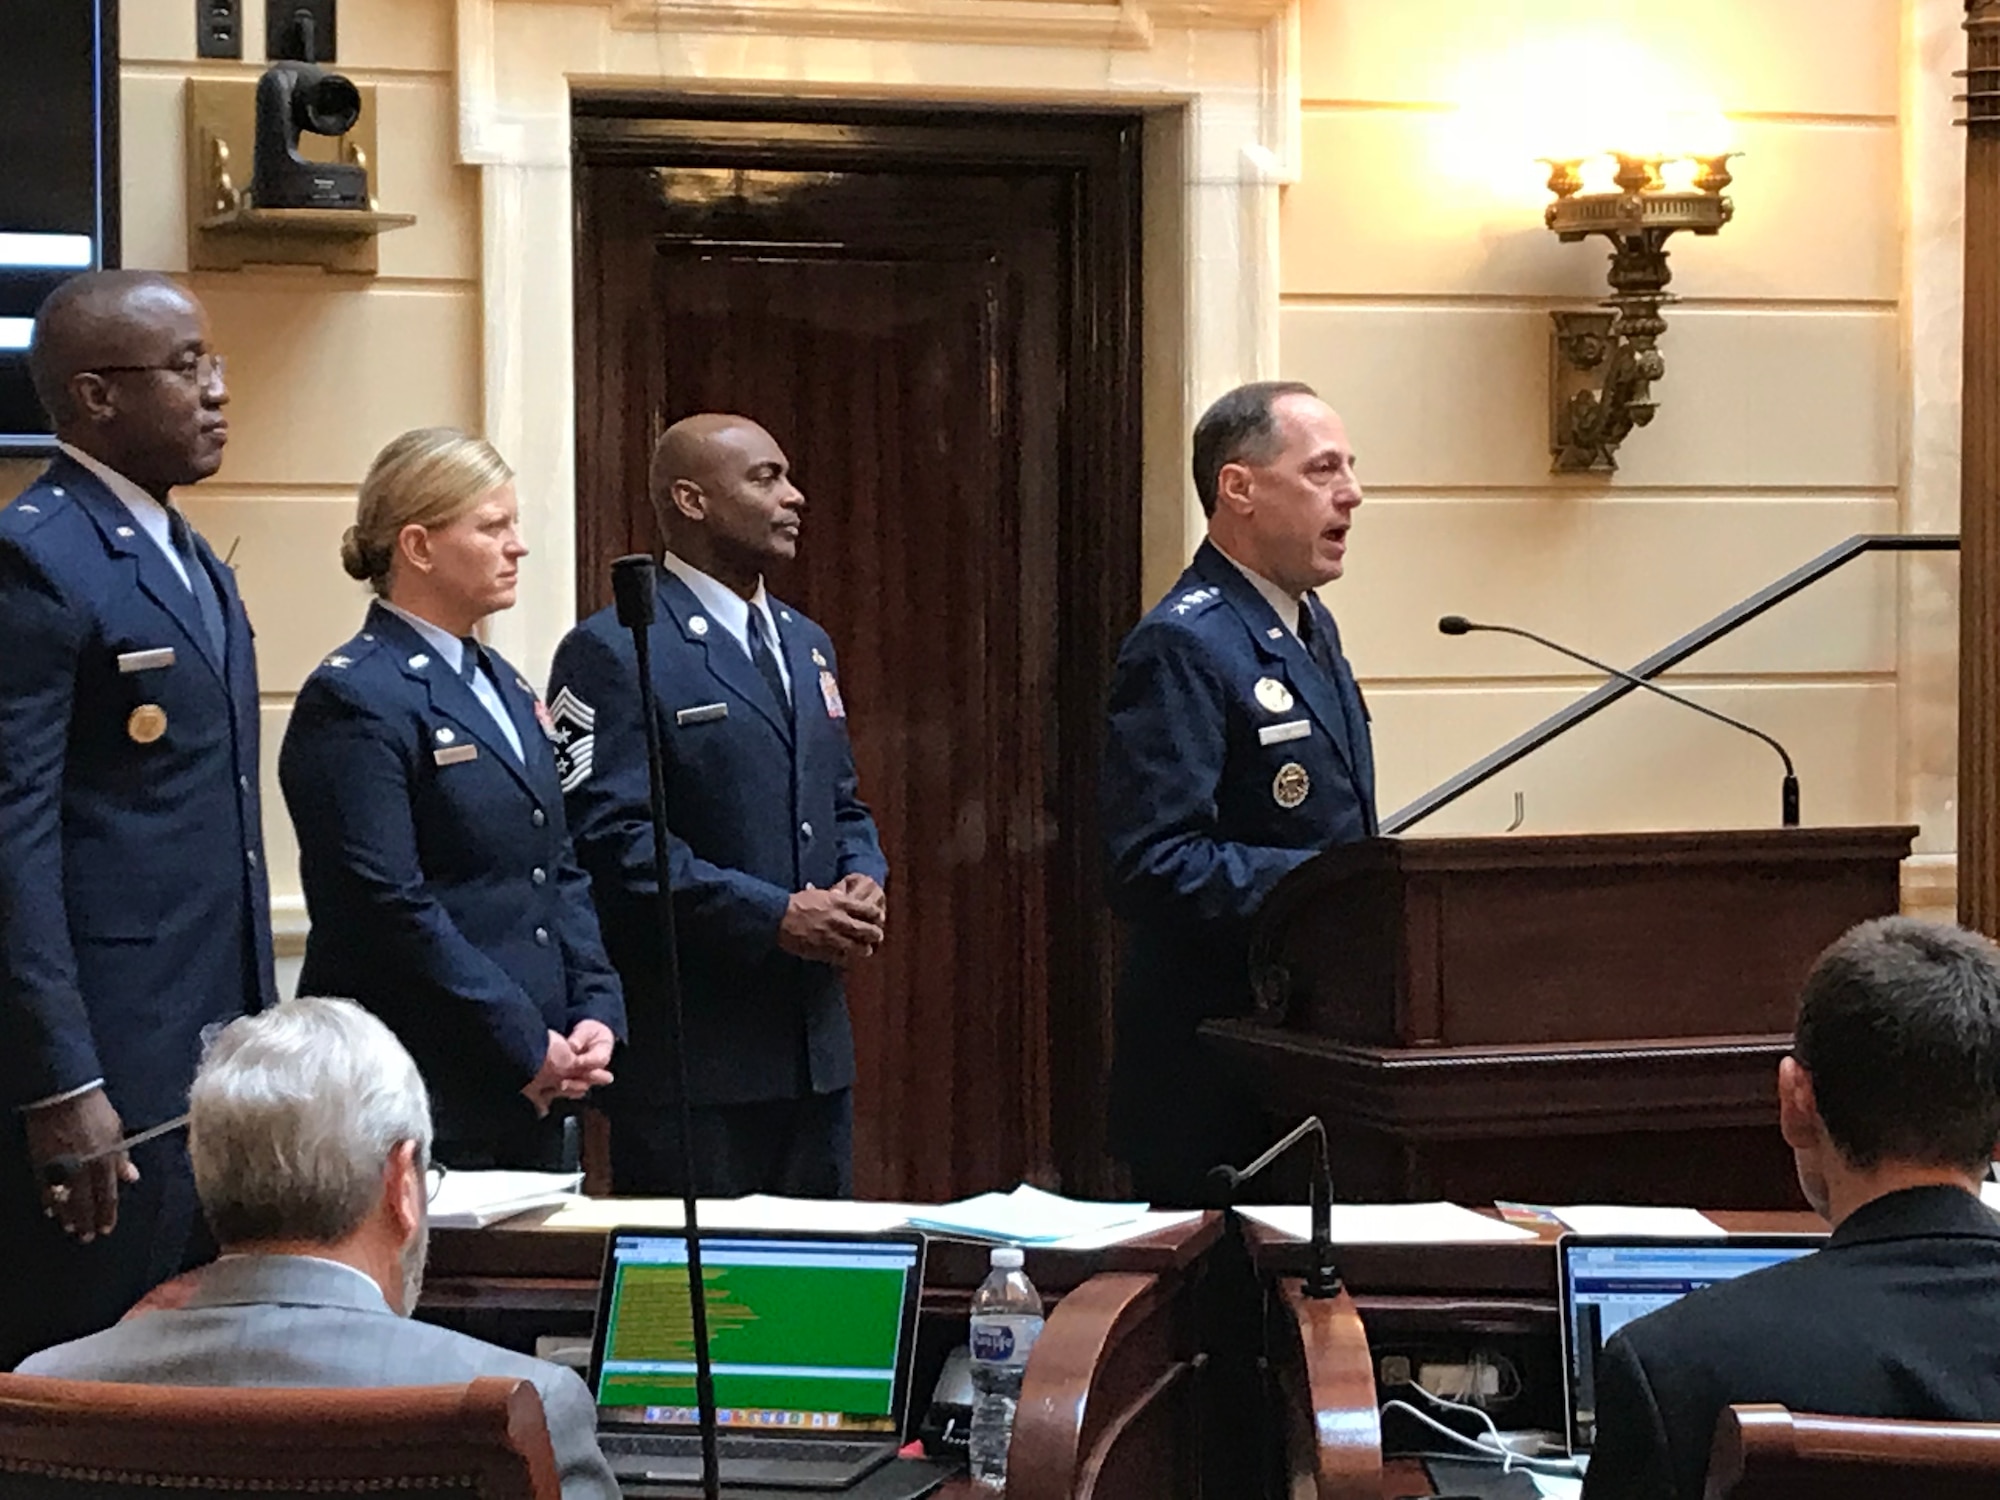 Air Force Sustainment Center Commander Lt. Gen. Lee K. Levy II addresses members of the Utah State House of Representatives on Wednesday. Lt Gen Levy also addressed members of the Utah State Senate concerning the importance of relationships between legislatures and military installations.  Military and civil leaders then attended the Meet the Military event at the Utah State Capitol rotunda. (Courtesy photo)